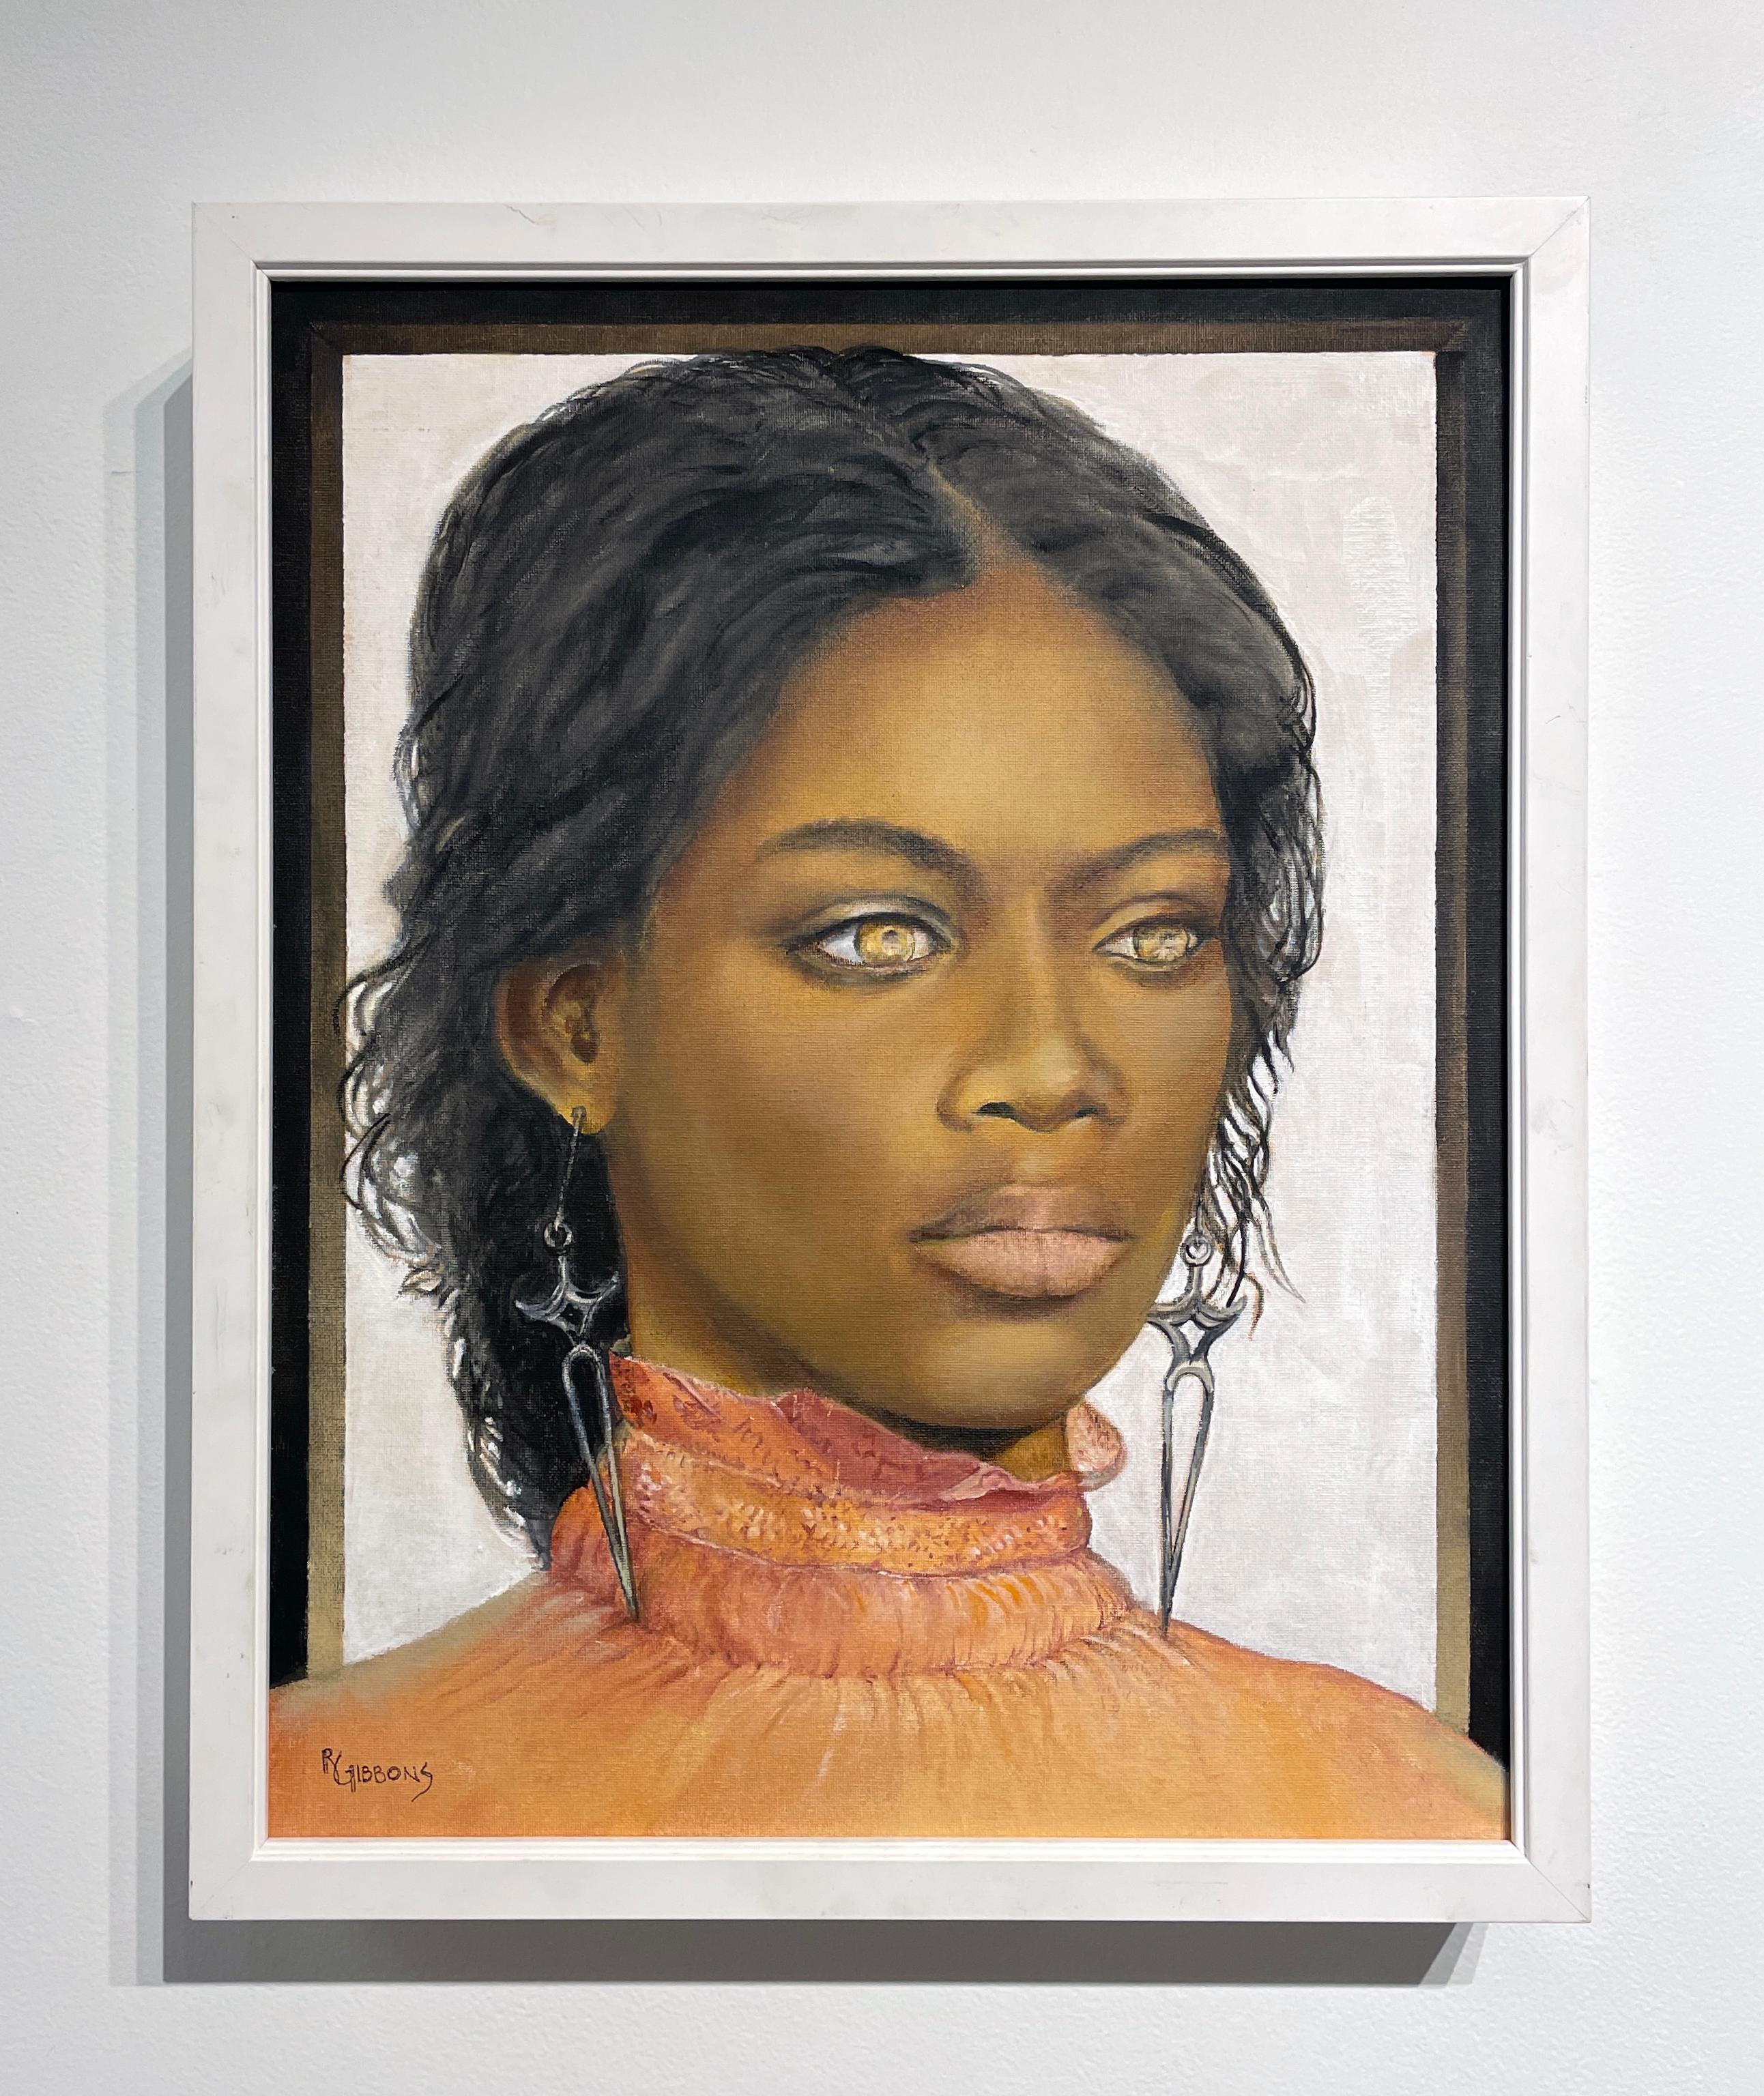 Golden Eyes - Portrait of a Woman with a Piercing Gaze, Original Oil Painting - Beige Portrait Painting by Richard Gibbons